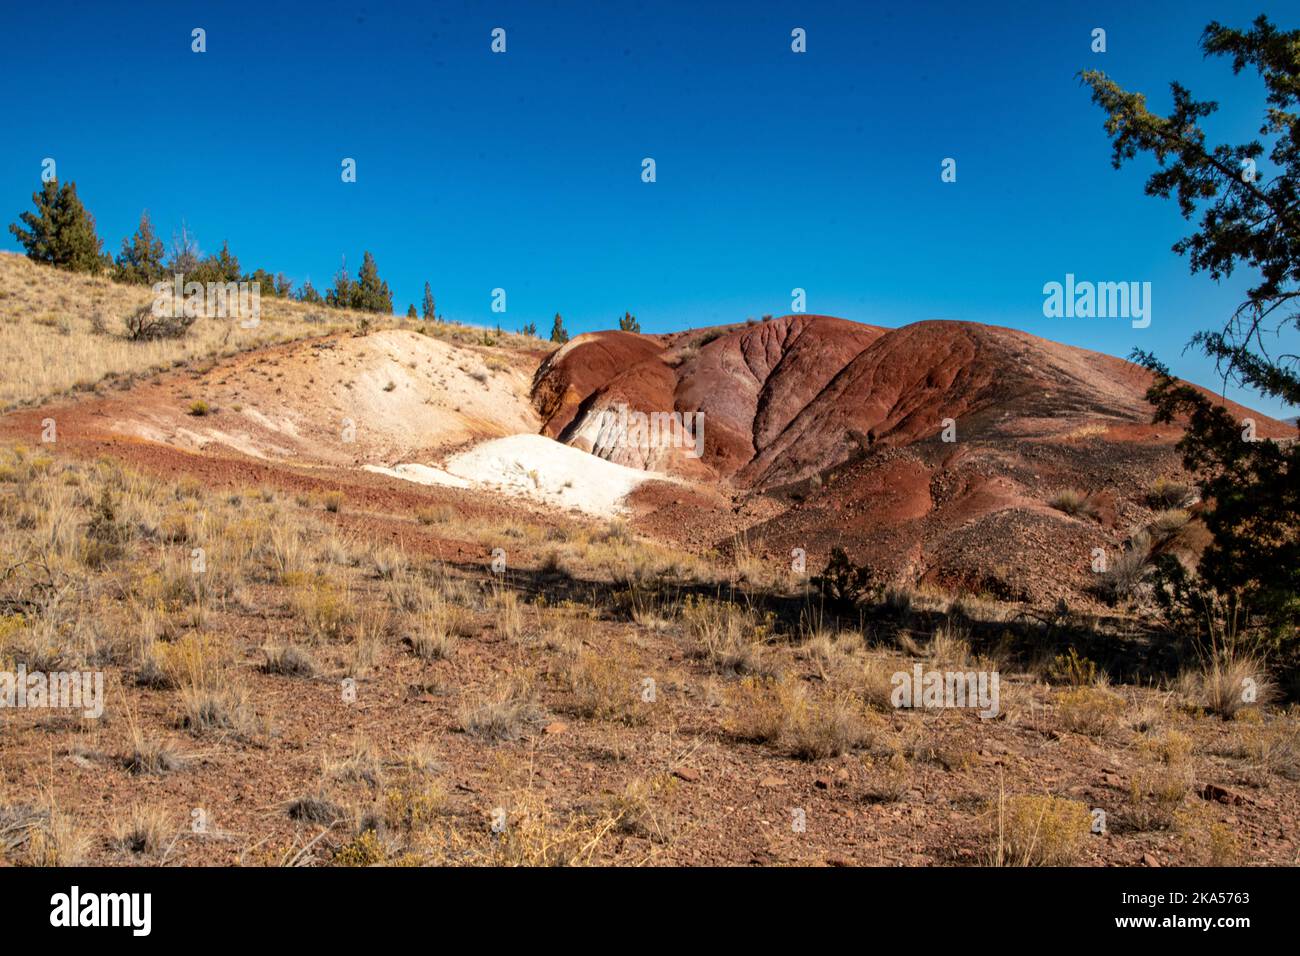 The painted Hill of John Key Fossil Beds, with the morning sun lighting up the hills. Stock Photo